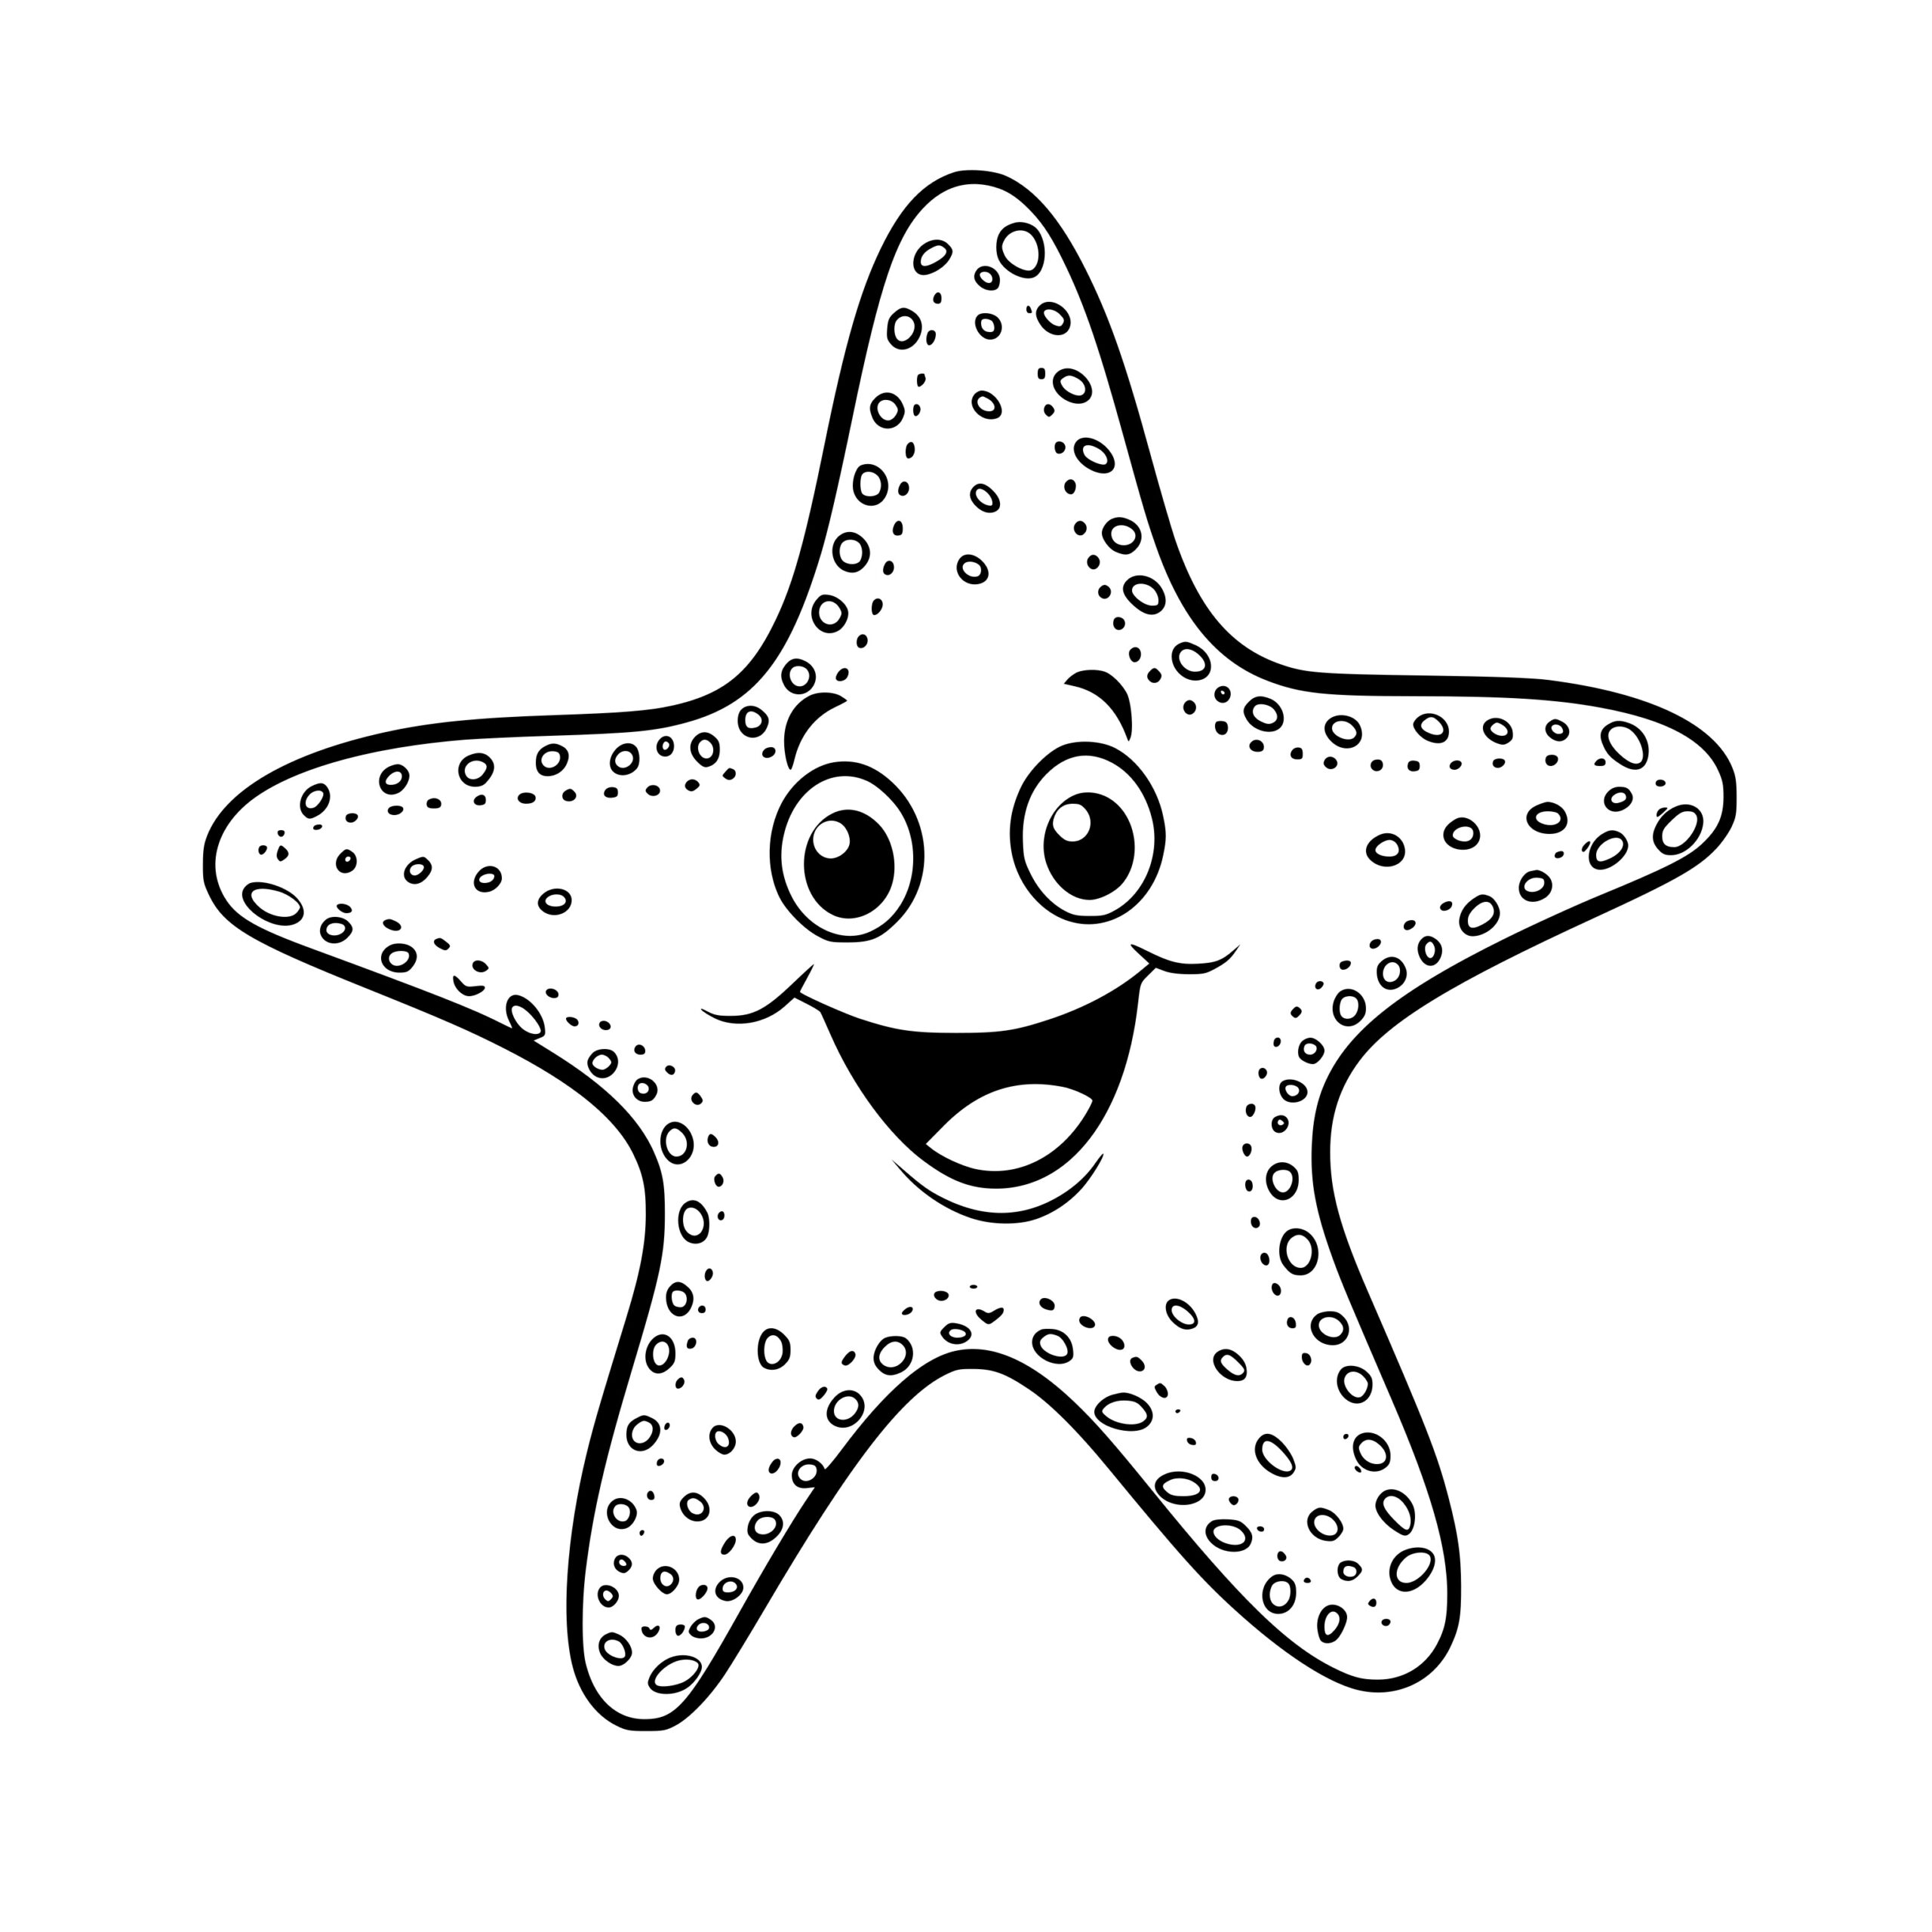 Friendy Starfish SVG Image for Cricut, Silhouette, and Laser Machines